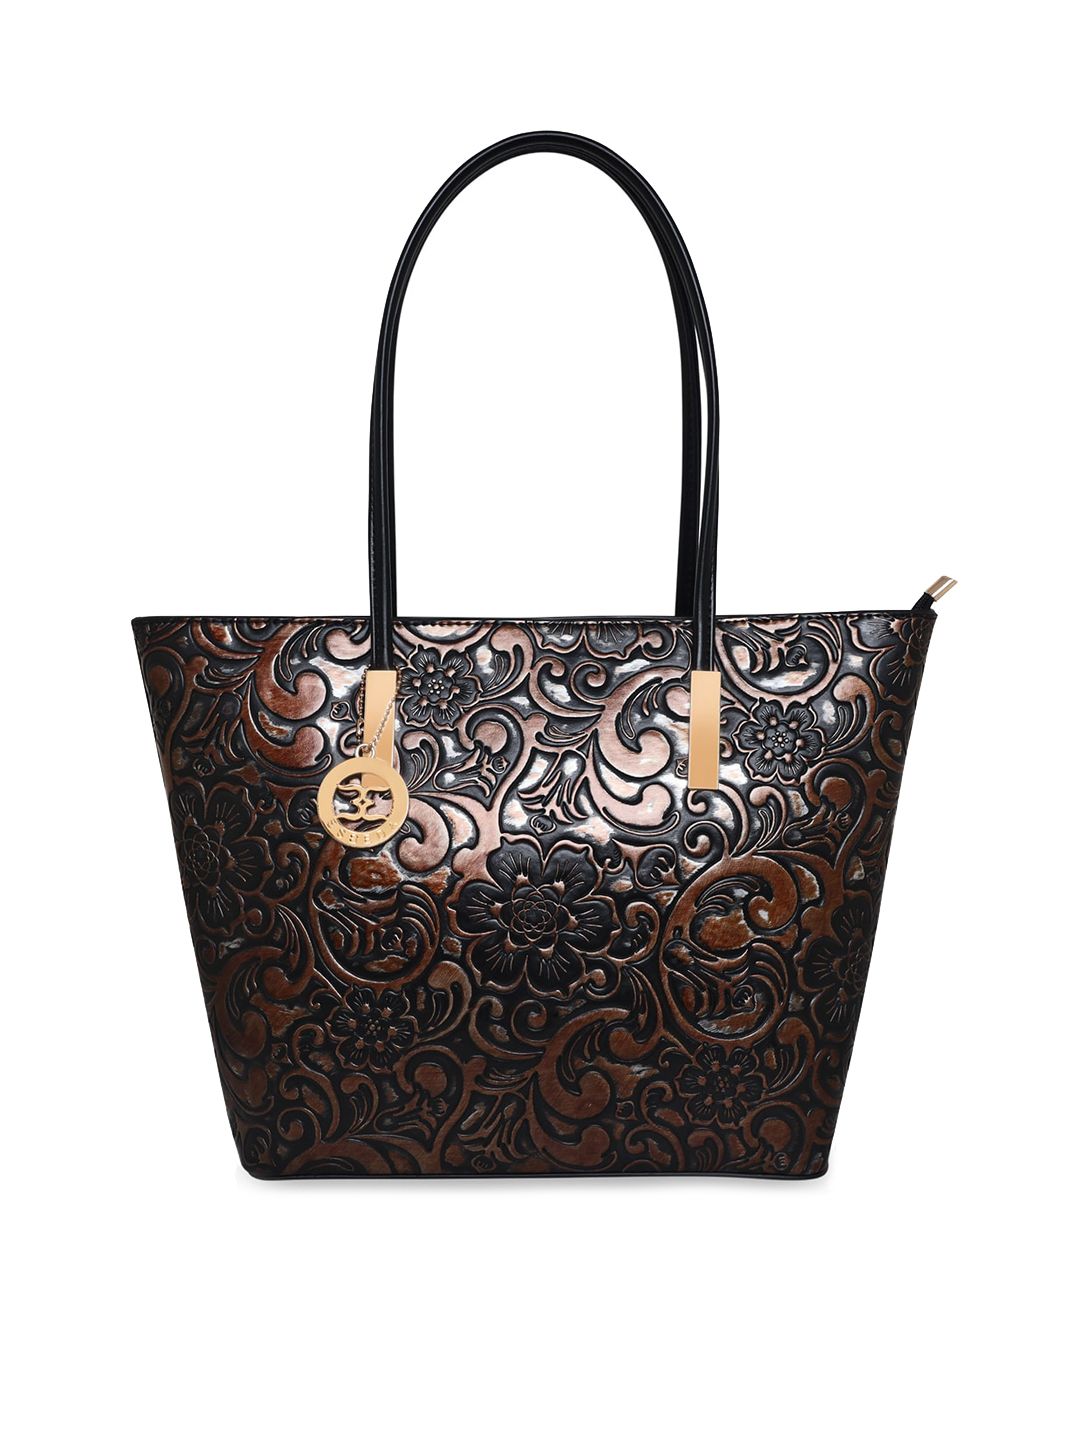 ESBEDA Brown Printed PU Structured Shoulder Bag with Applique Price in India